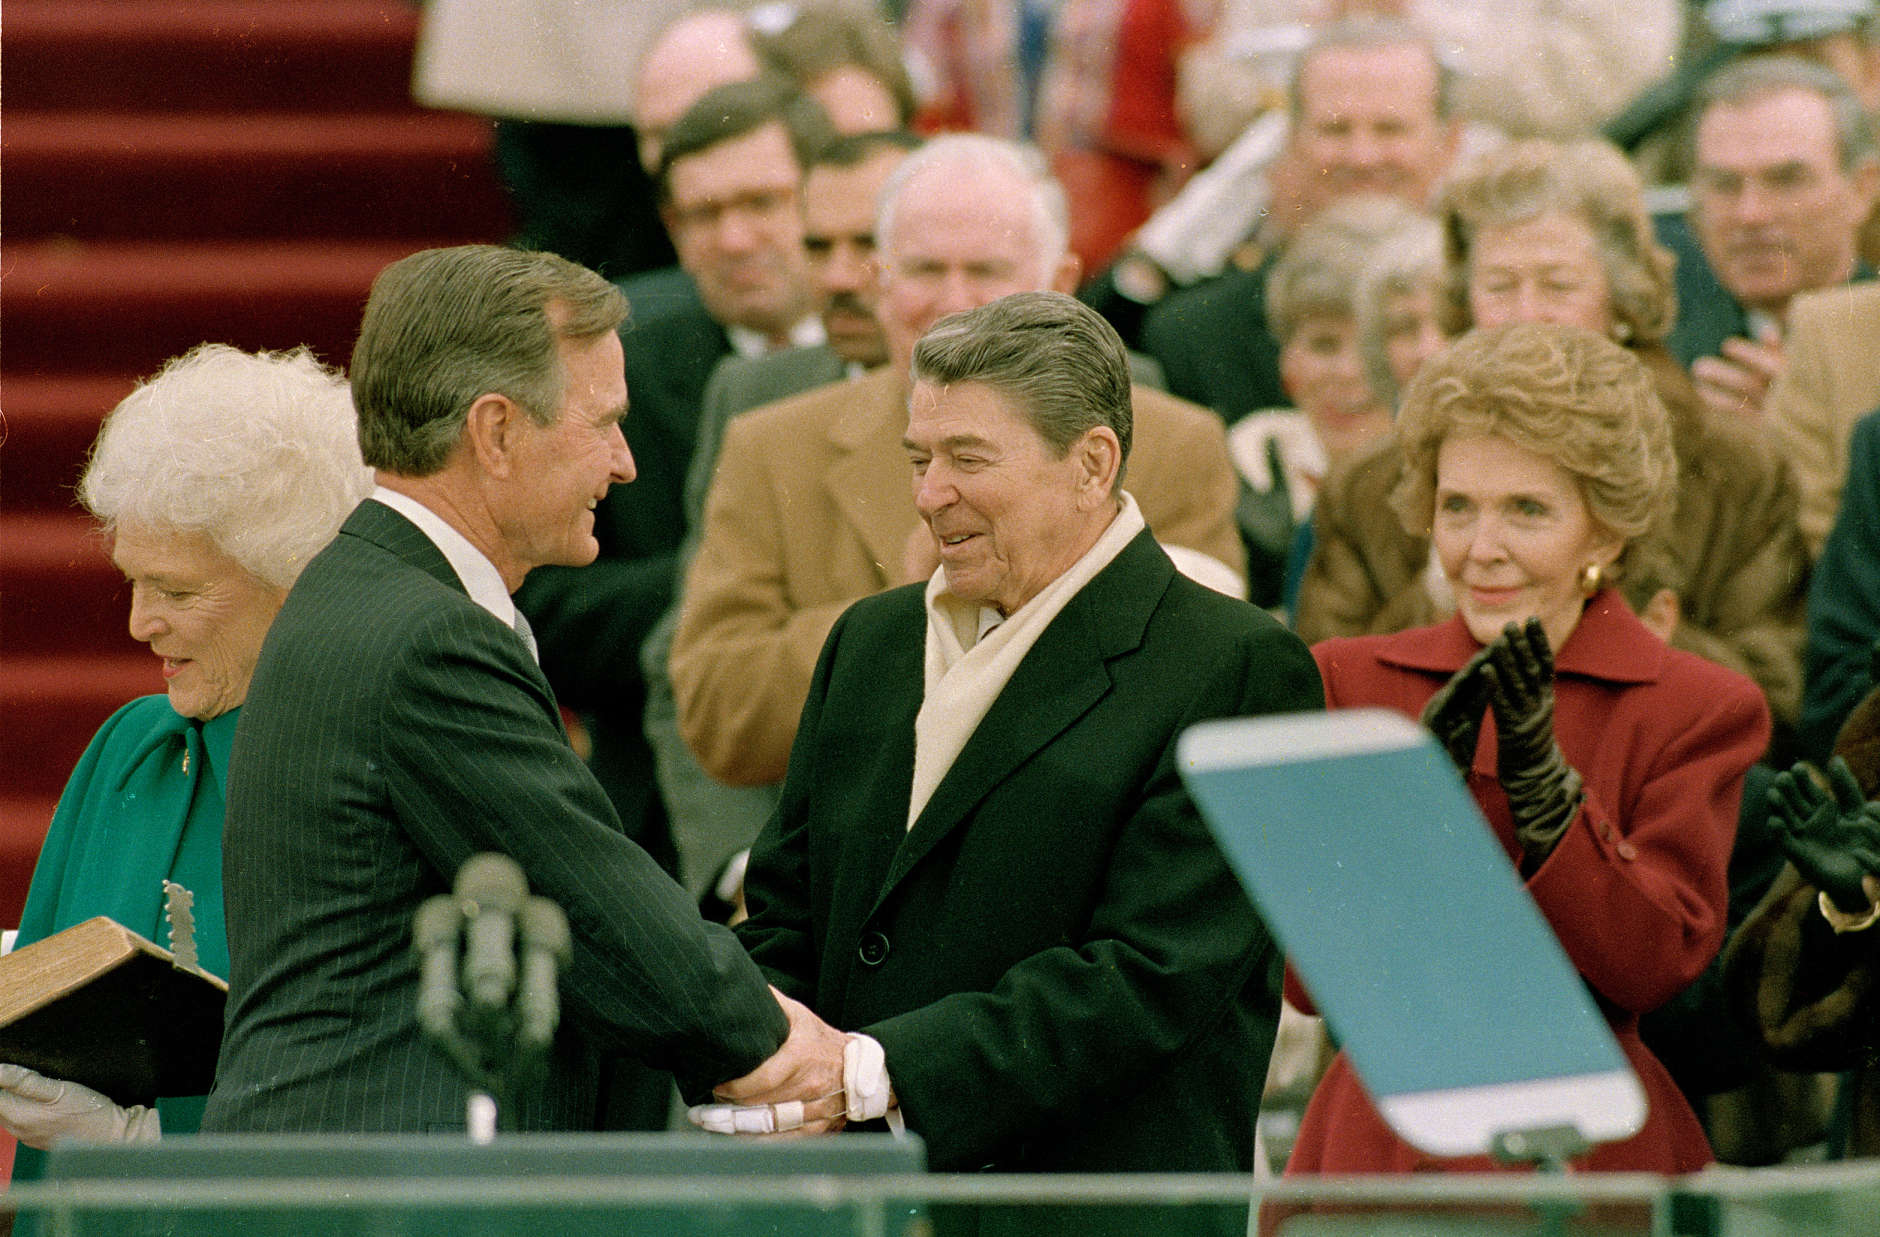 President George Bush, left, is congratulated by outgoing President Ronald Reagan after Bush took the oath of office as the 41st president of the United States on Capitol Hill in Washington, D.C., Friday, Jan. 20, 1989.  Shown at left is first lady Barbara Bush and applauding at right is Nancy Reagan.  (AP Photo/Bob Daugherty)